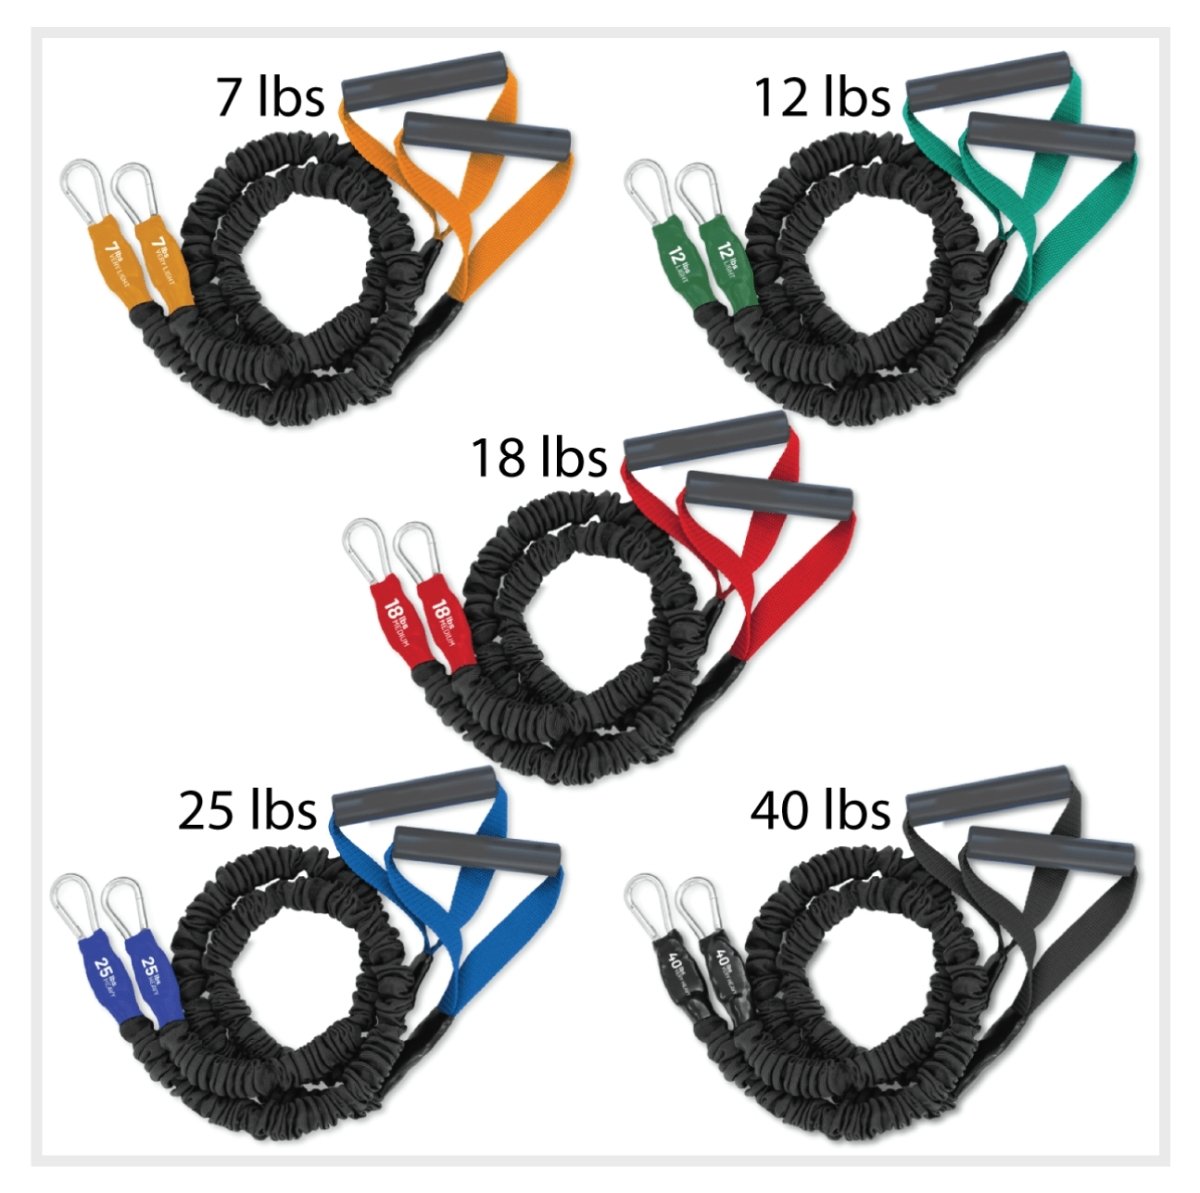 X-Over Shoulder and Arm Resistance Bands- 5 Pack (7lb/12lb/18lb/25lb/40lb) - FitCord Resistance Bands American made covered resistance bands, tubes for working out, shoulder and upper body exercise bands.